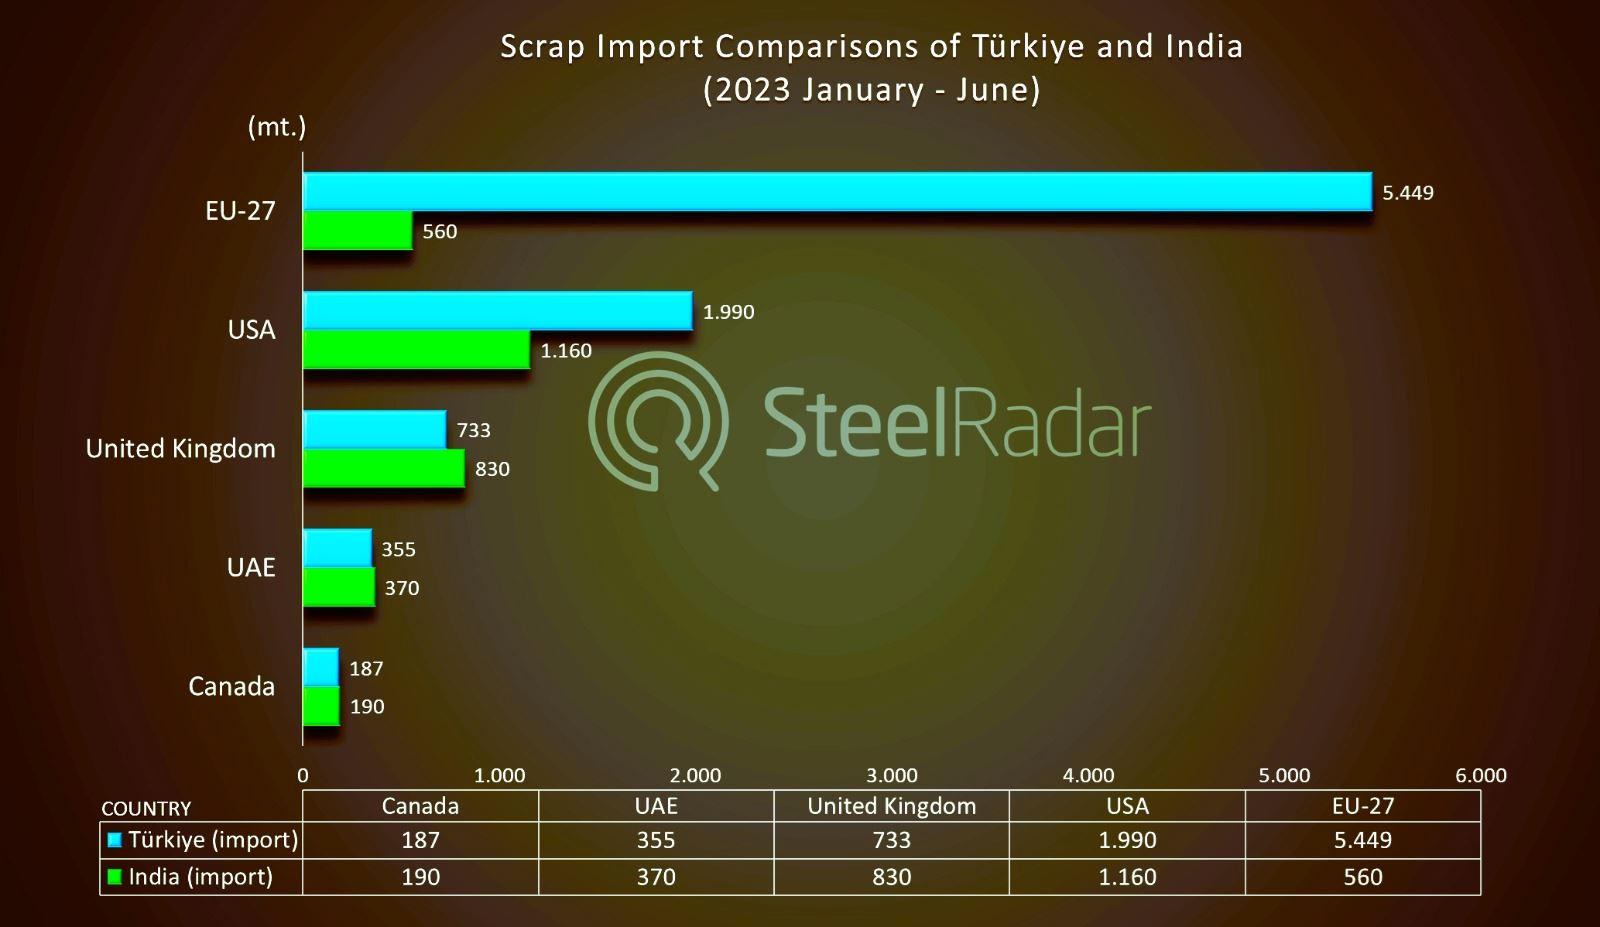 India is close to Turkey's scrap imports!